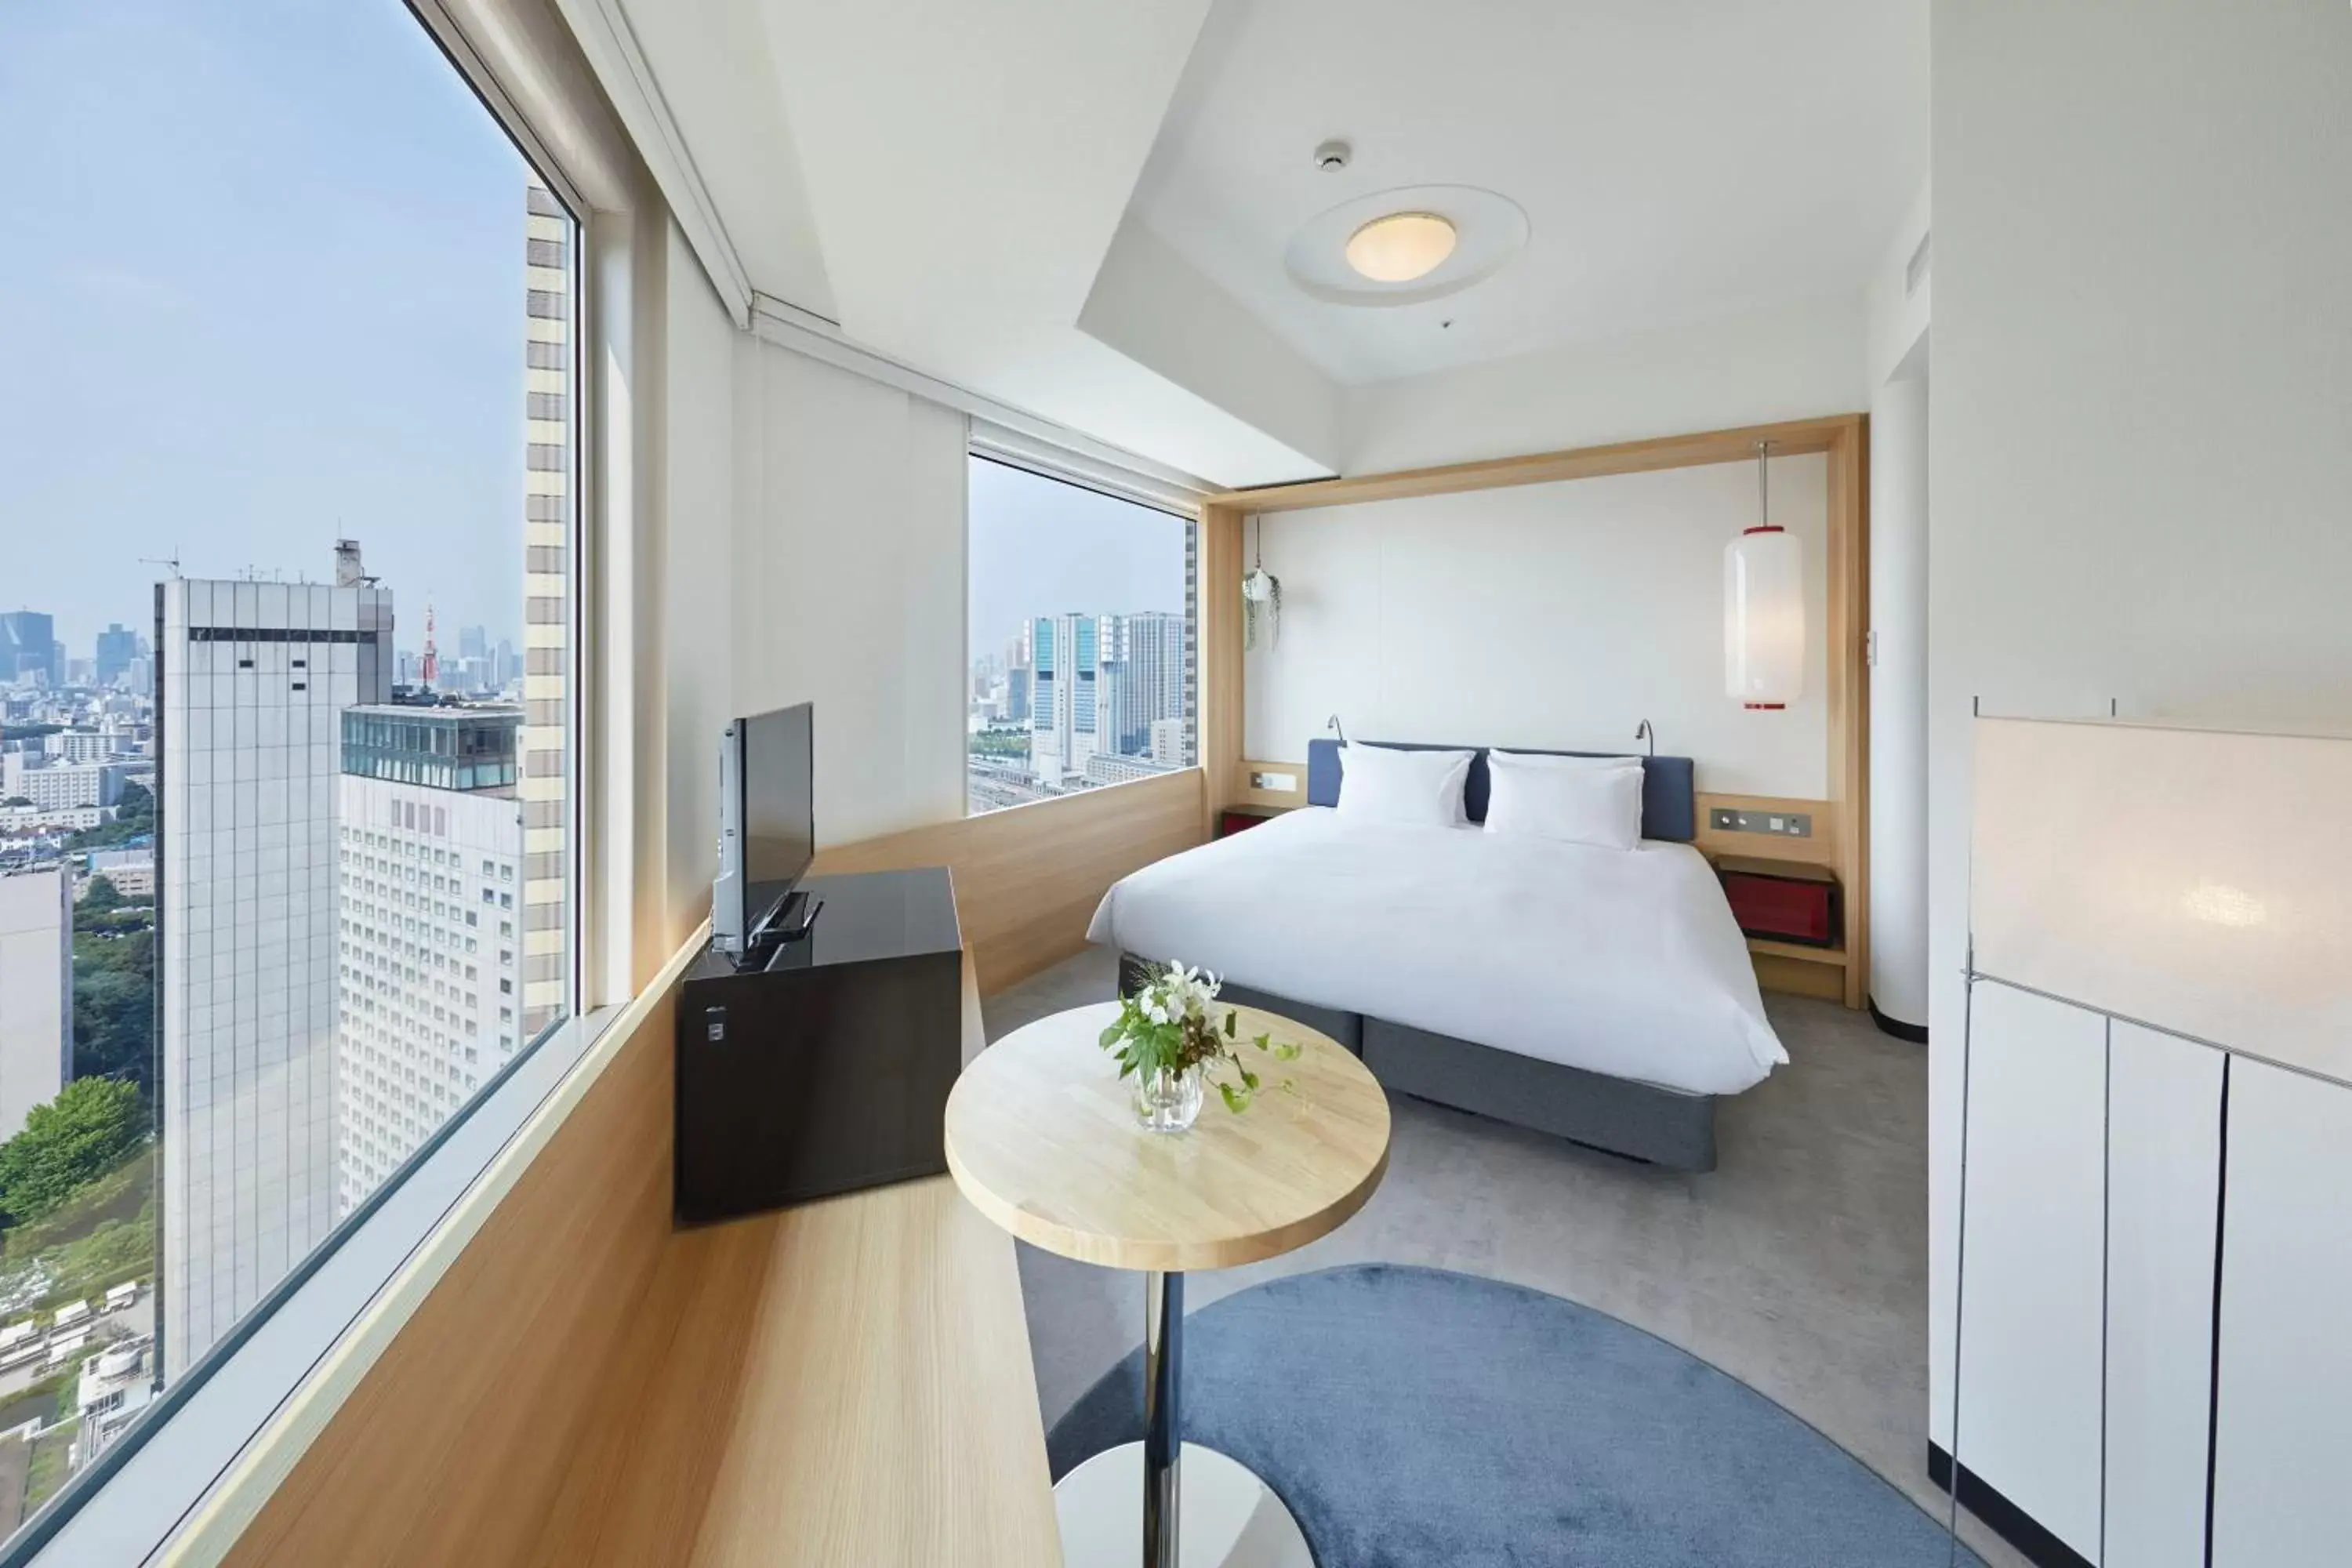 Annex Tower - single occupancy - Millennial King Room - Non-Smoking 30th-32nd Floor  in Shinagawa Prince Hotel